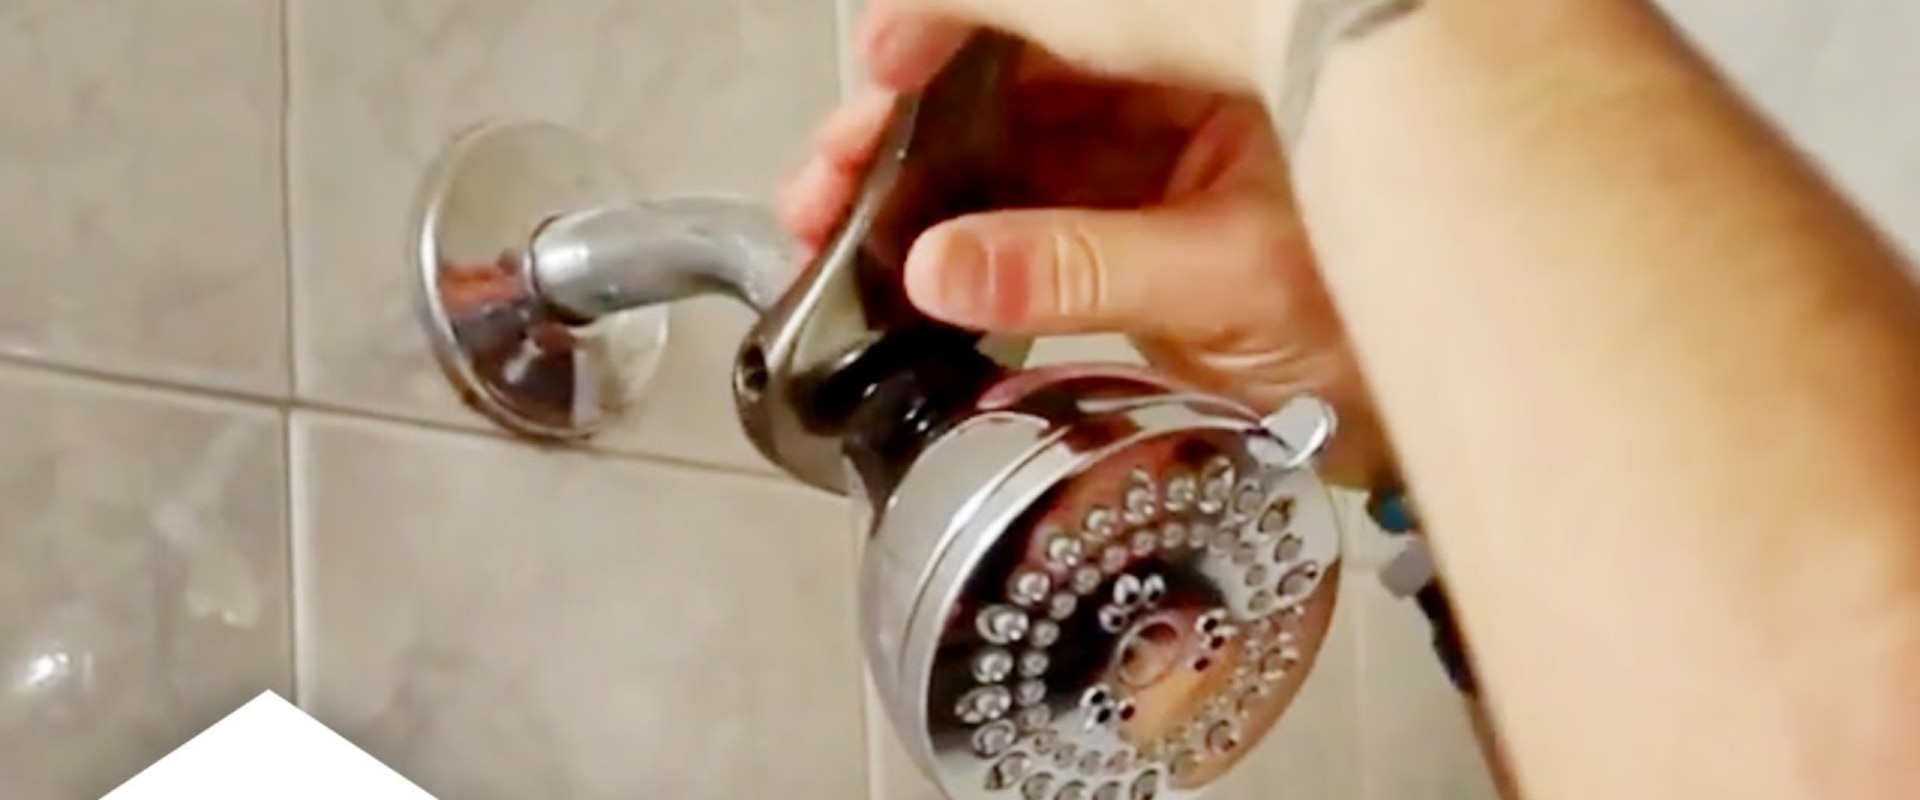 Replacing Old Toilets or Shower Heads: Tips for Improving Your Bathroom